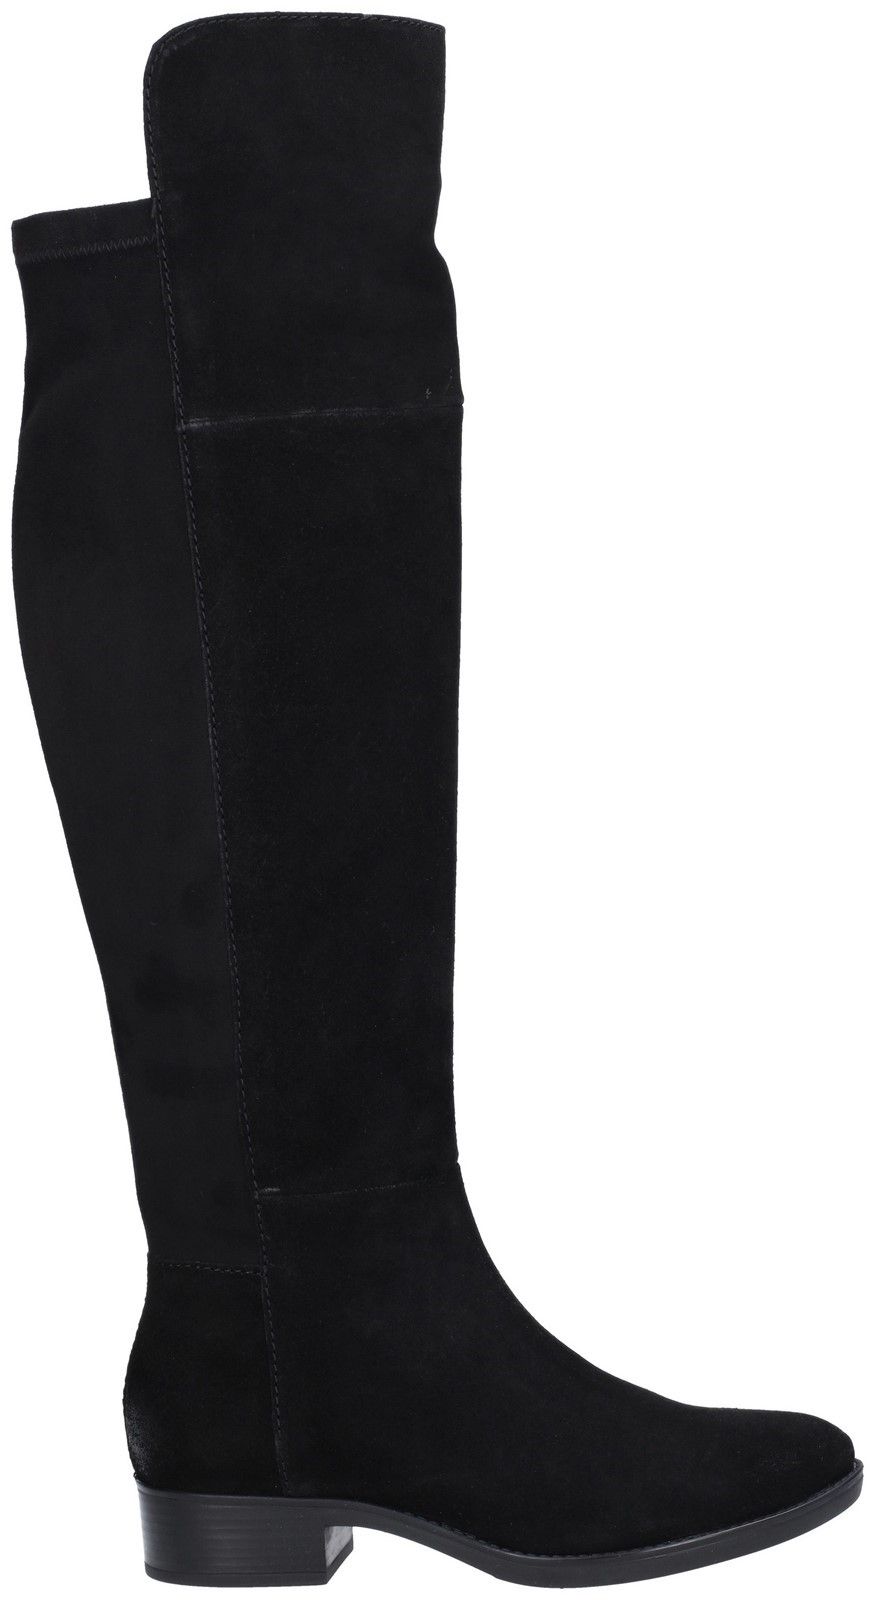 Geox Women's long boot with an appealing aesthetic that will never go out of fashion.Leather/Suede Upper. 
Stylish.